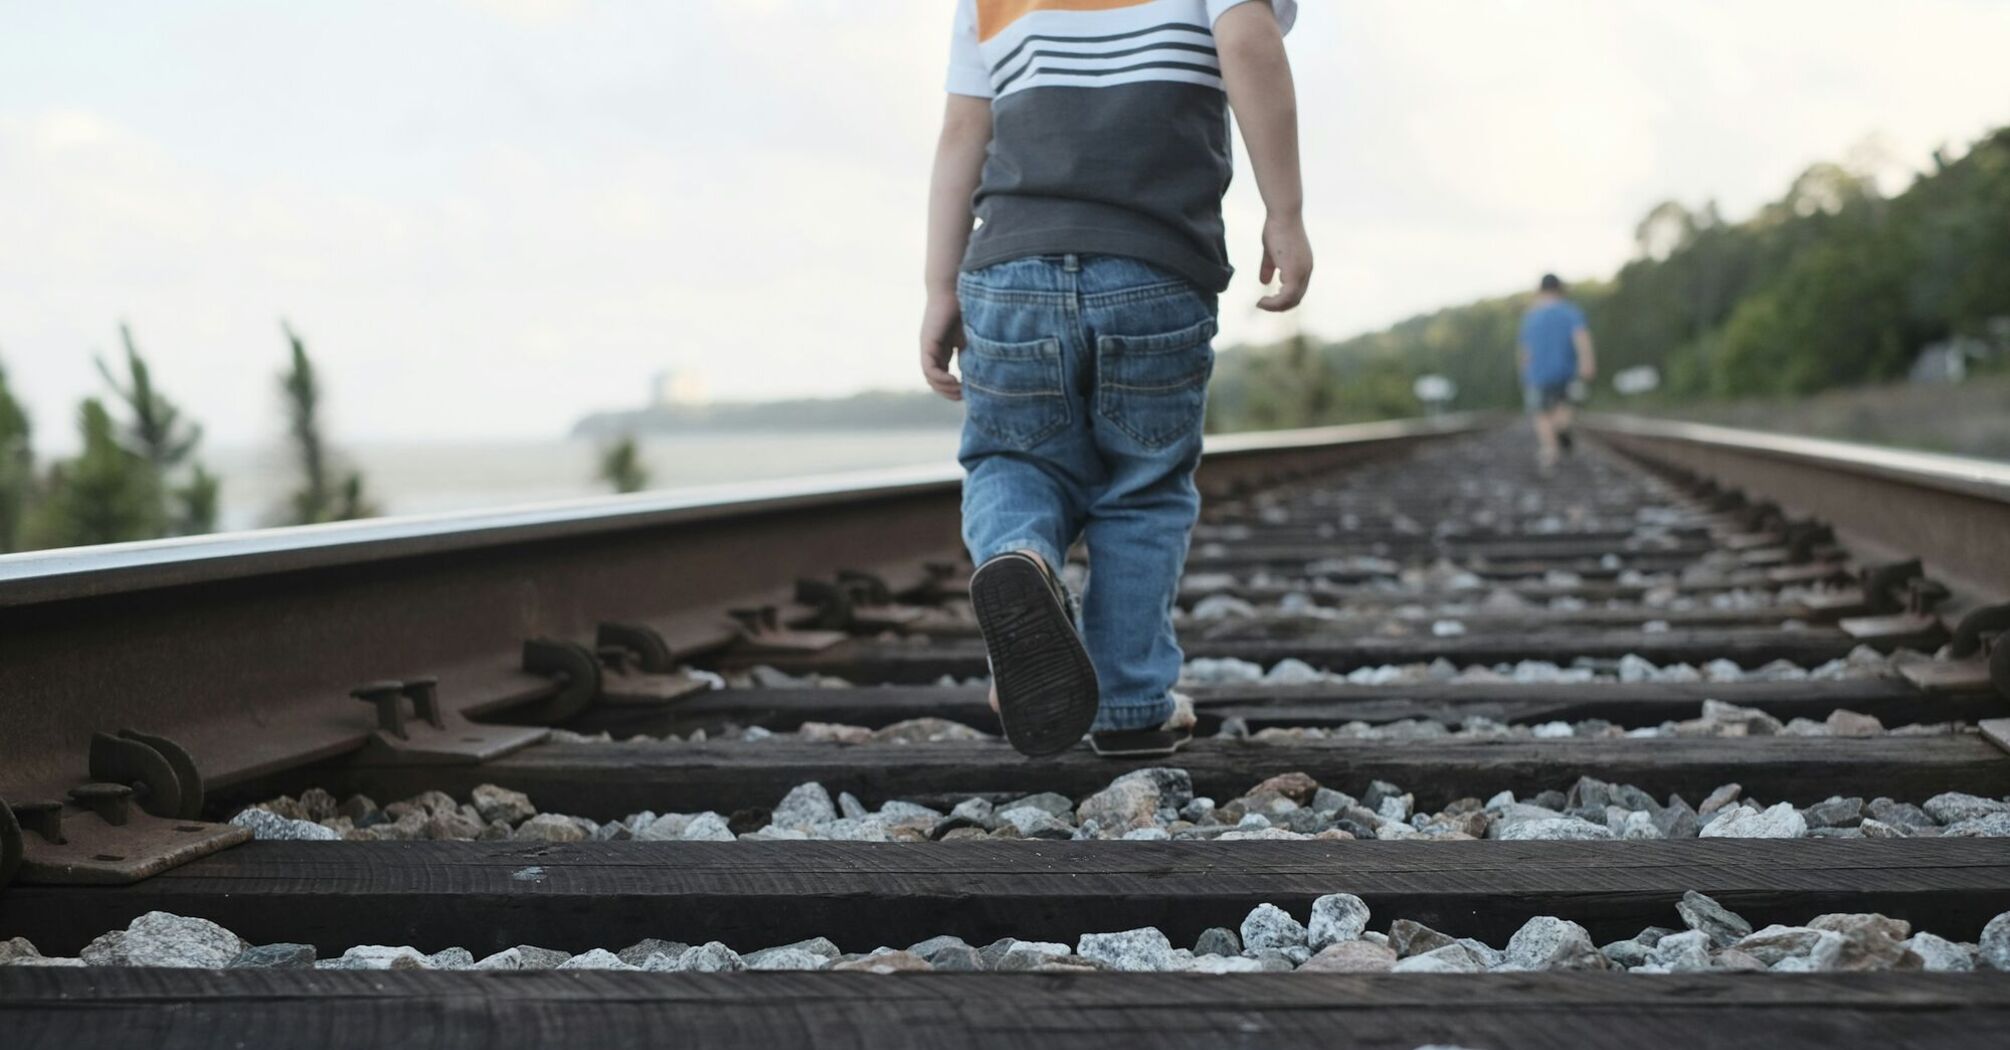 A child walking on railway tracks with an adult in the distance